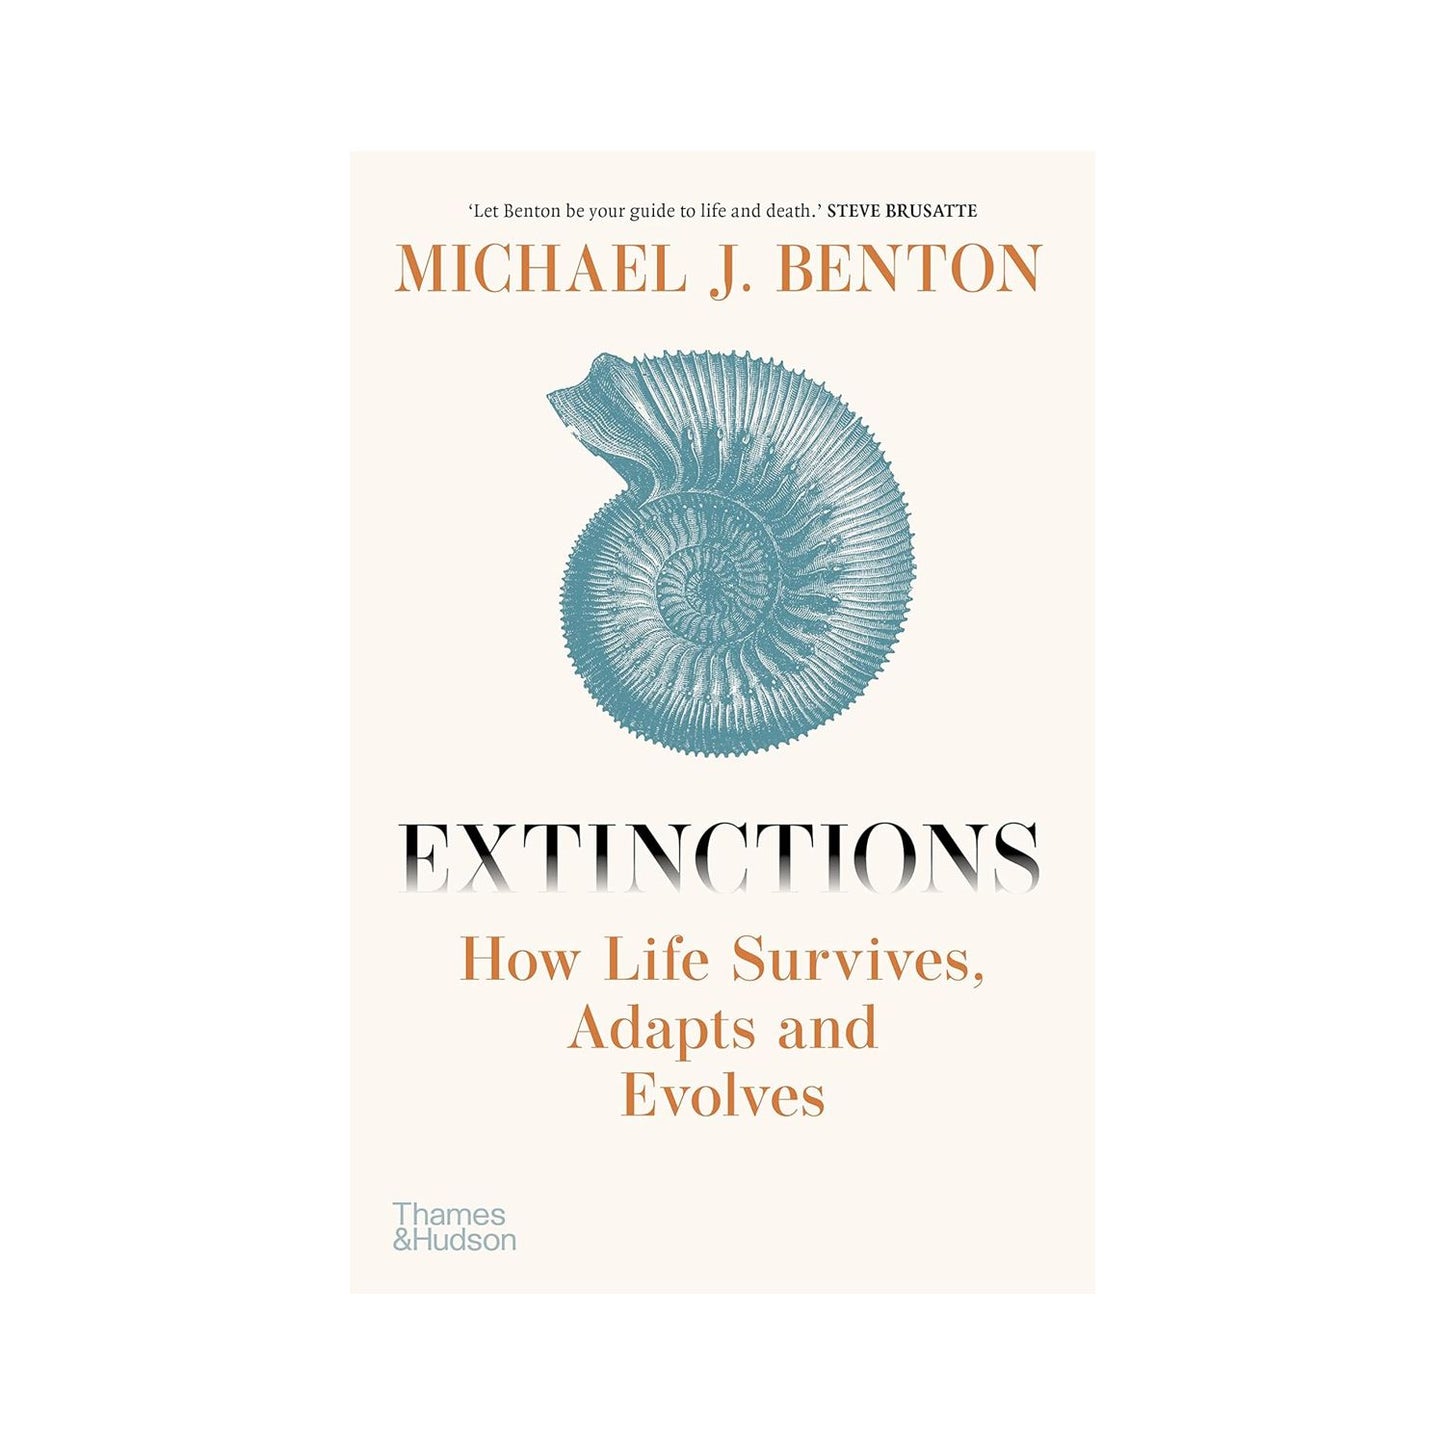 Extinctions: How Life Survives, Adapts and Evolves